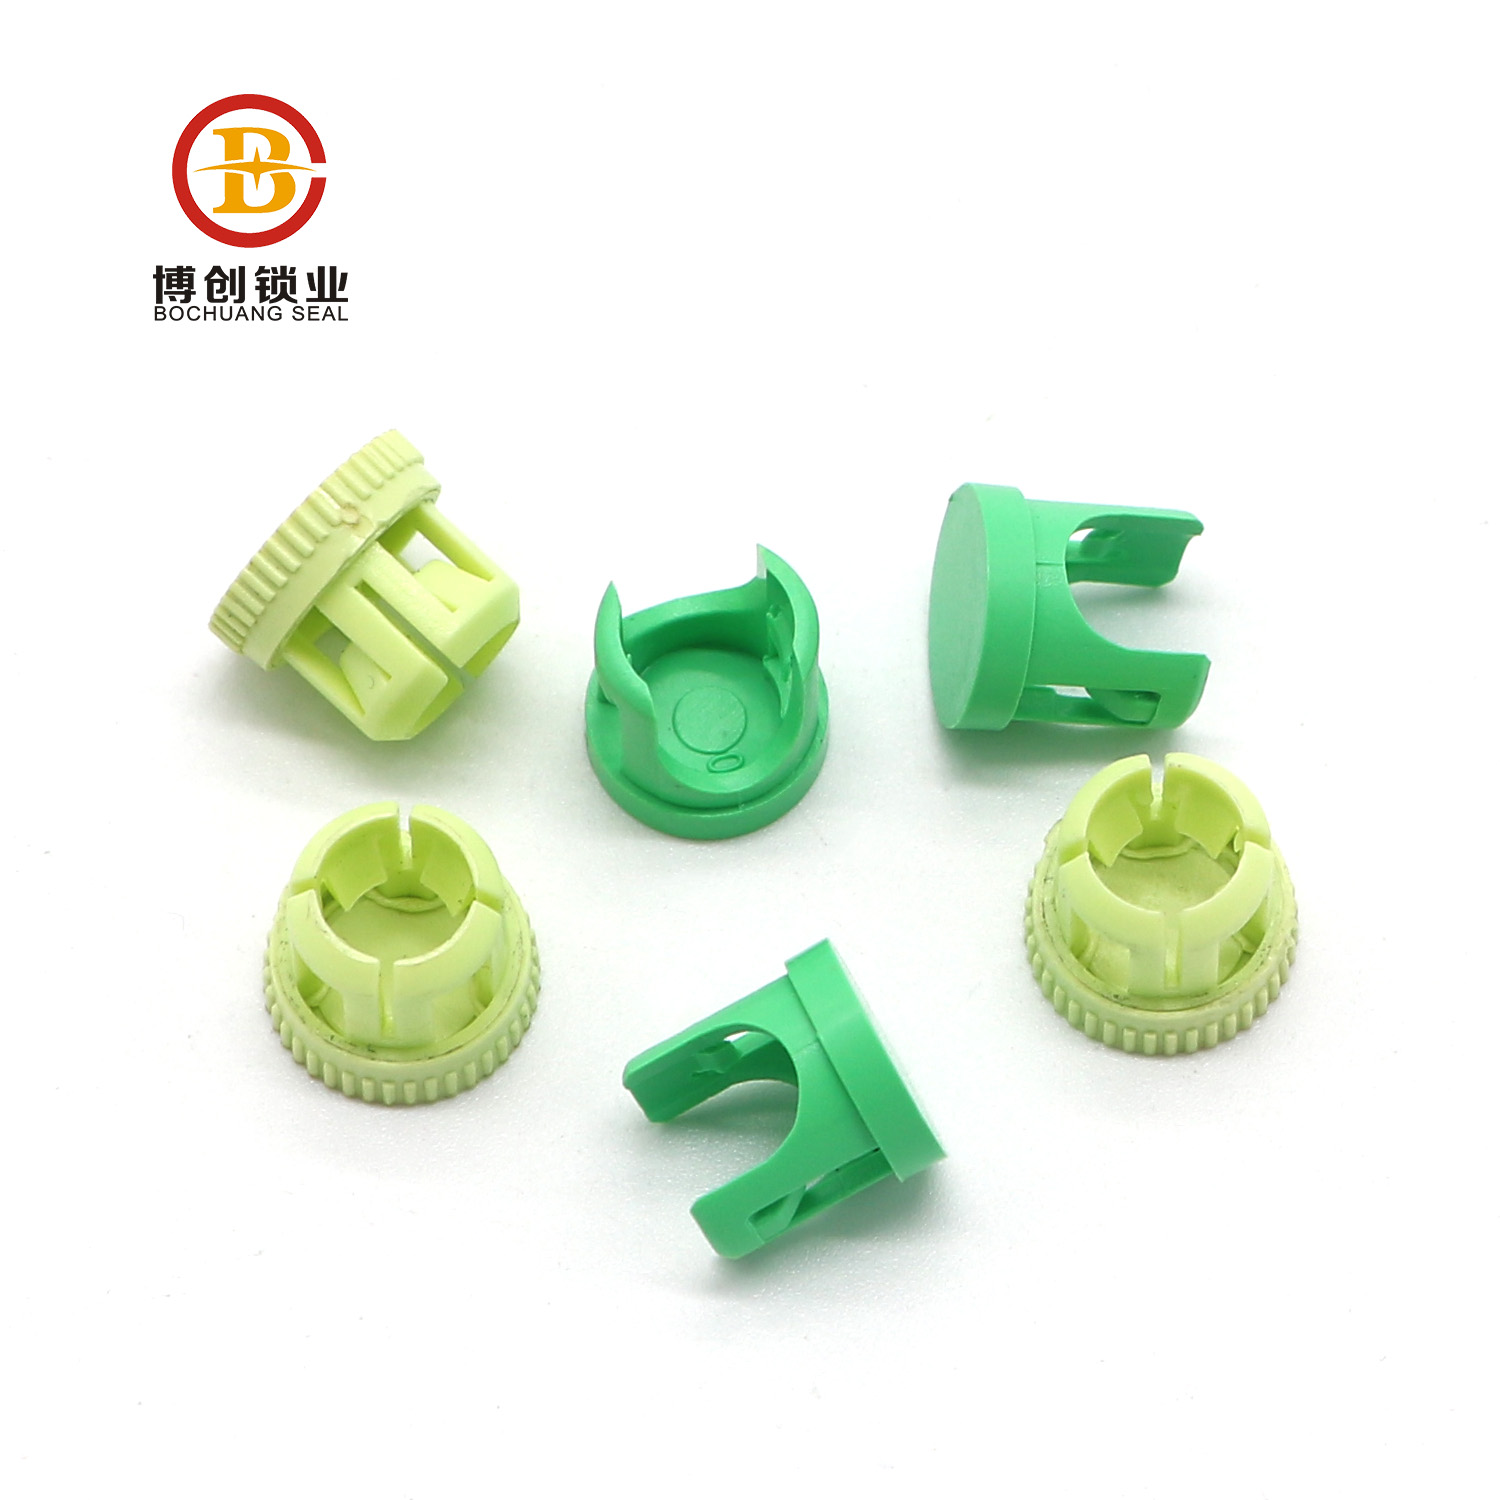 BCM303 High quality tamper proof electric meter security seals